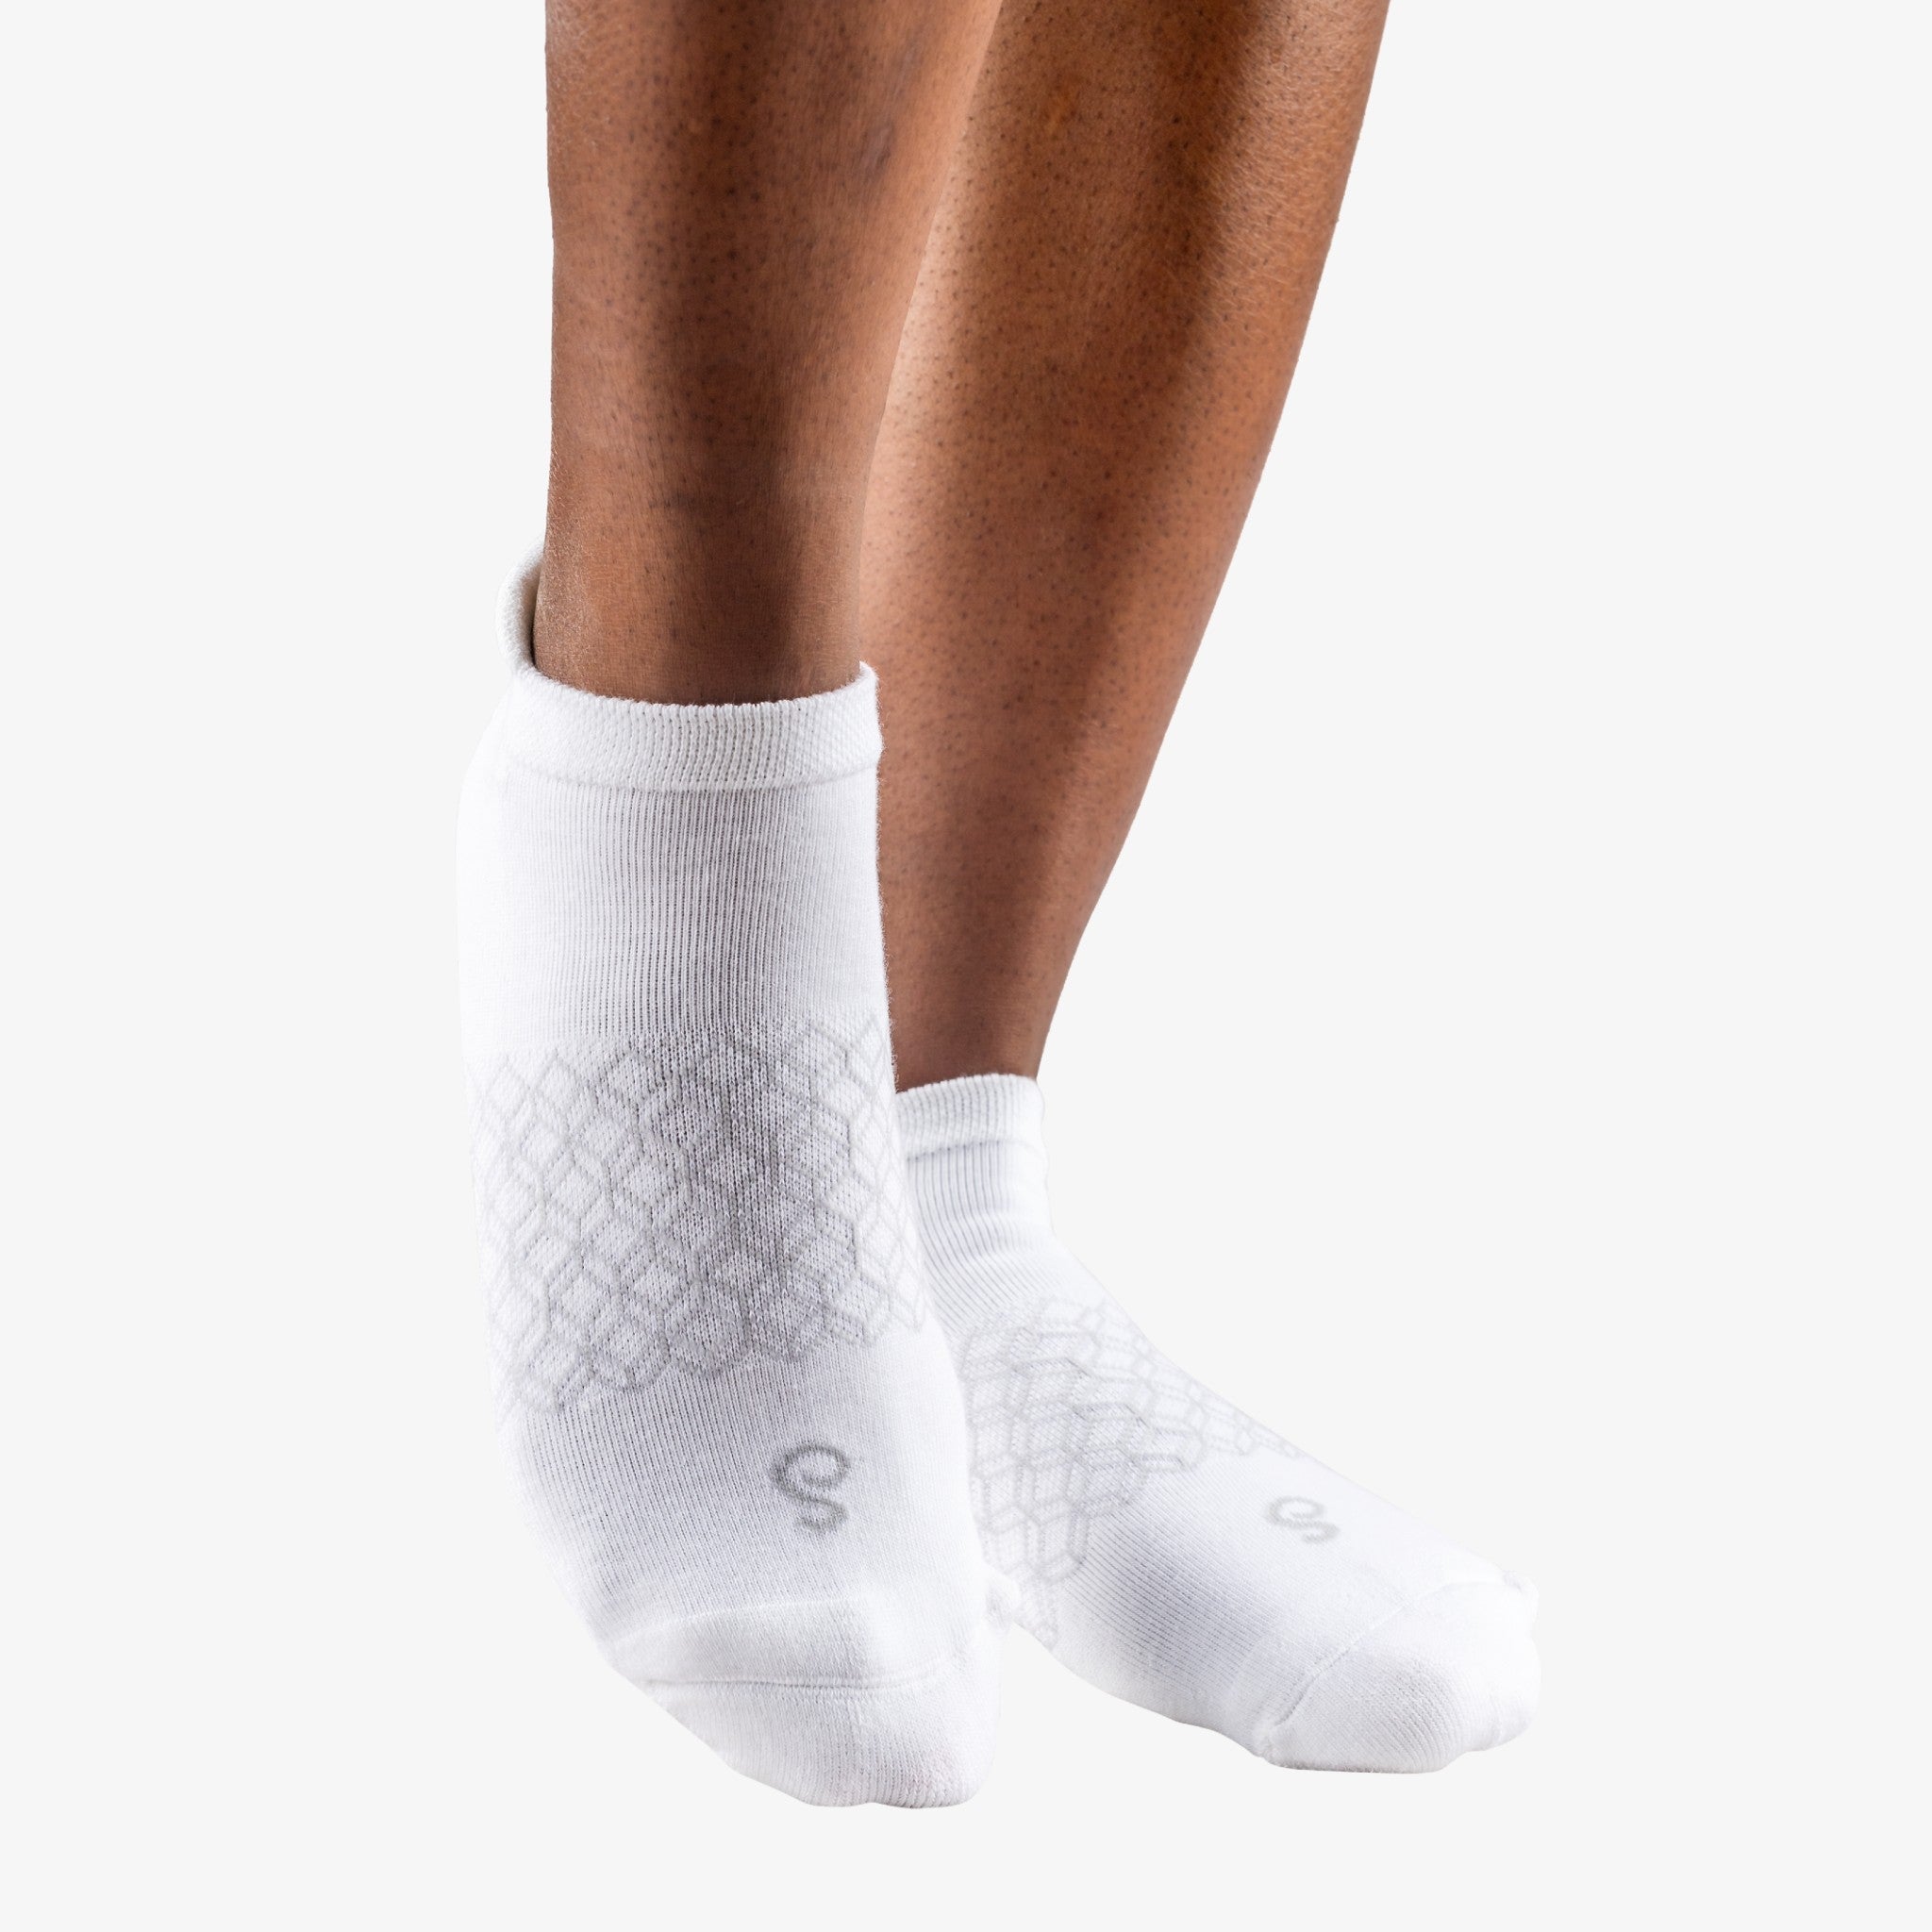 Product picture of roam - organic combed cotton trainer socks